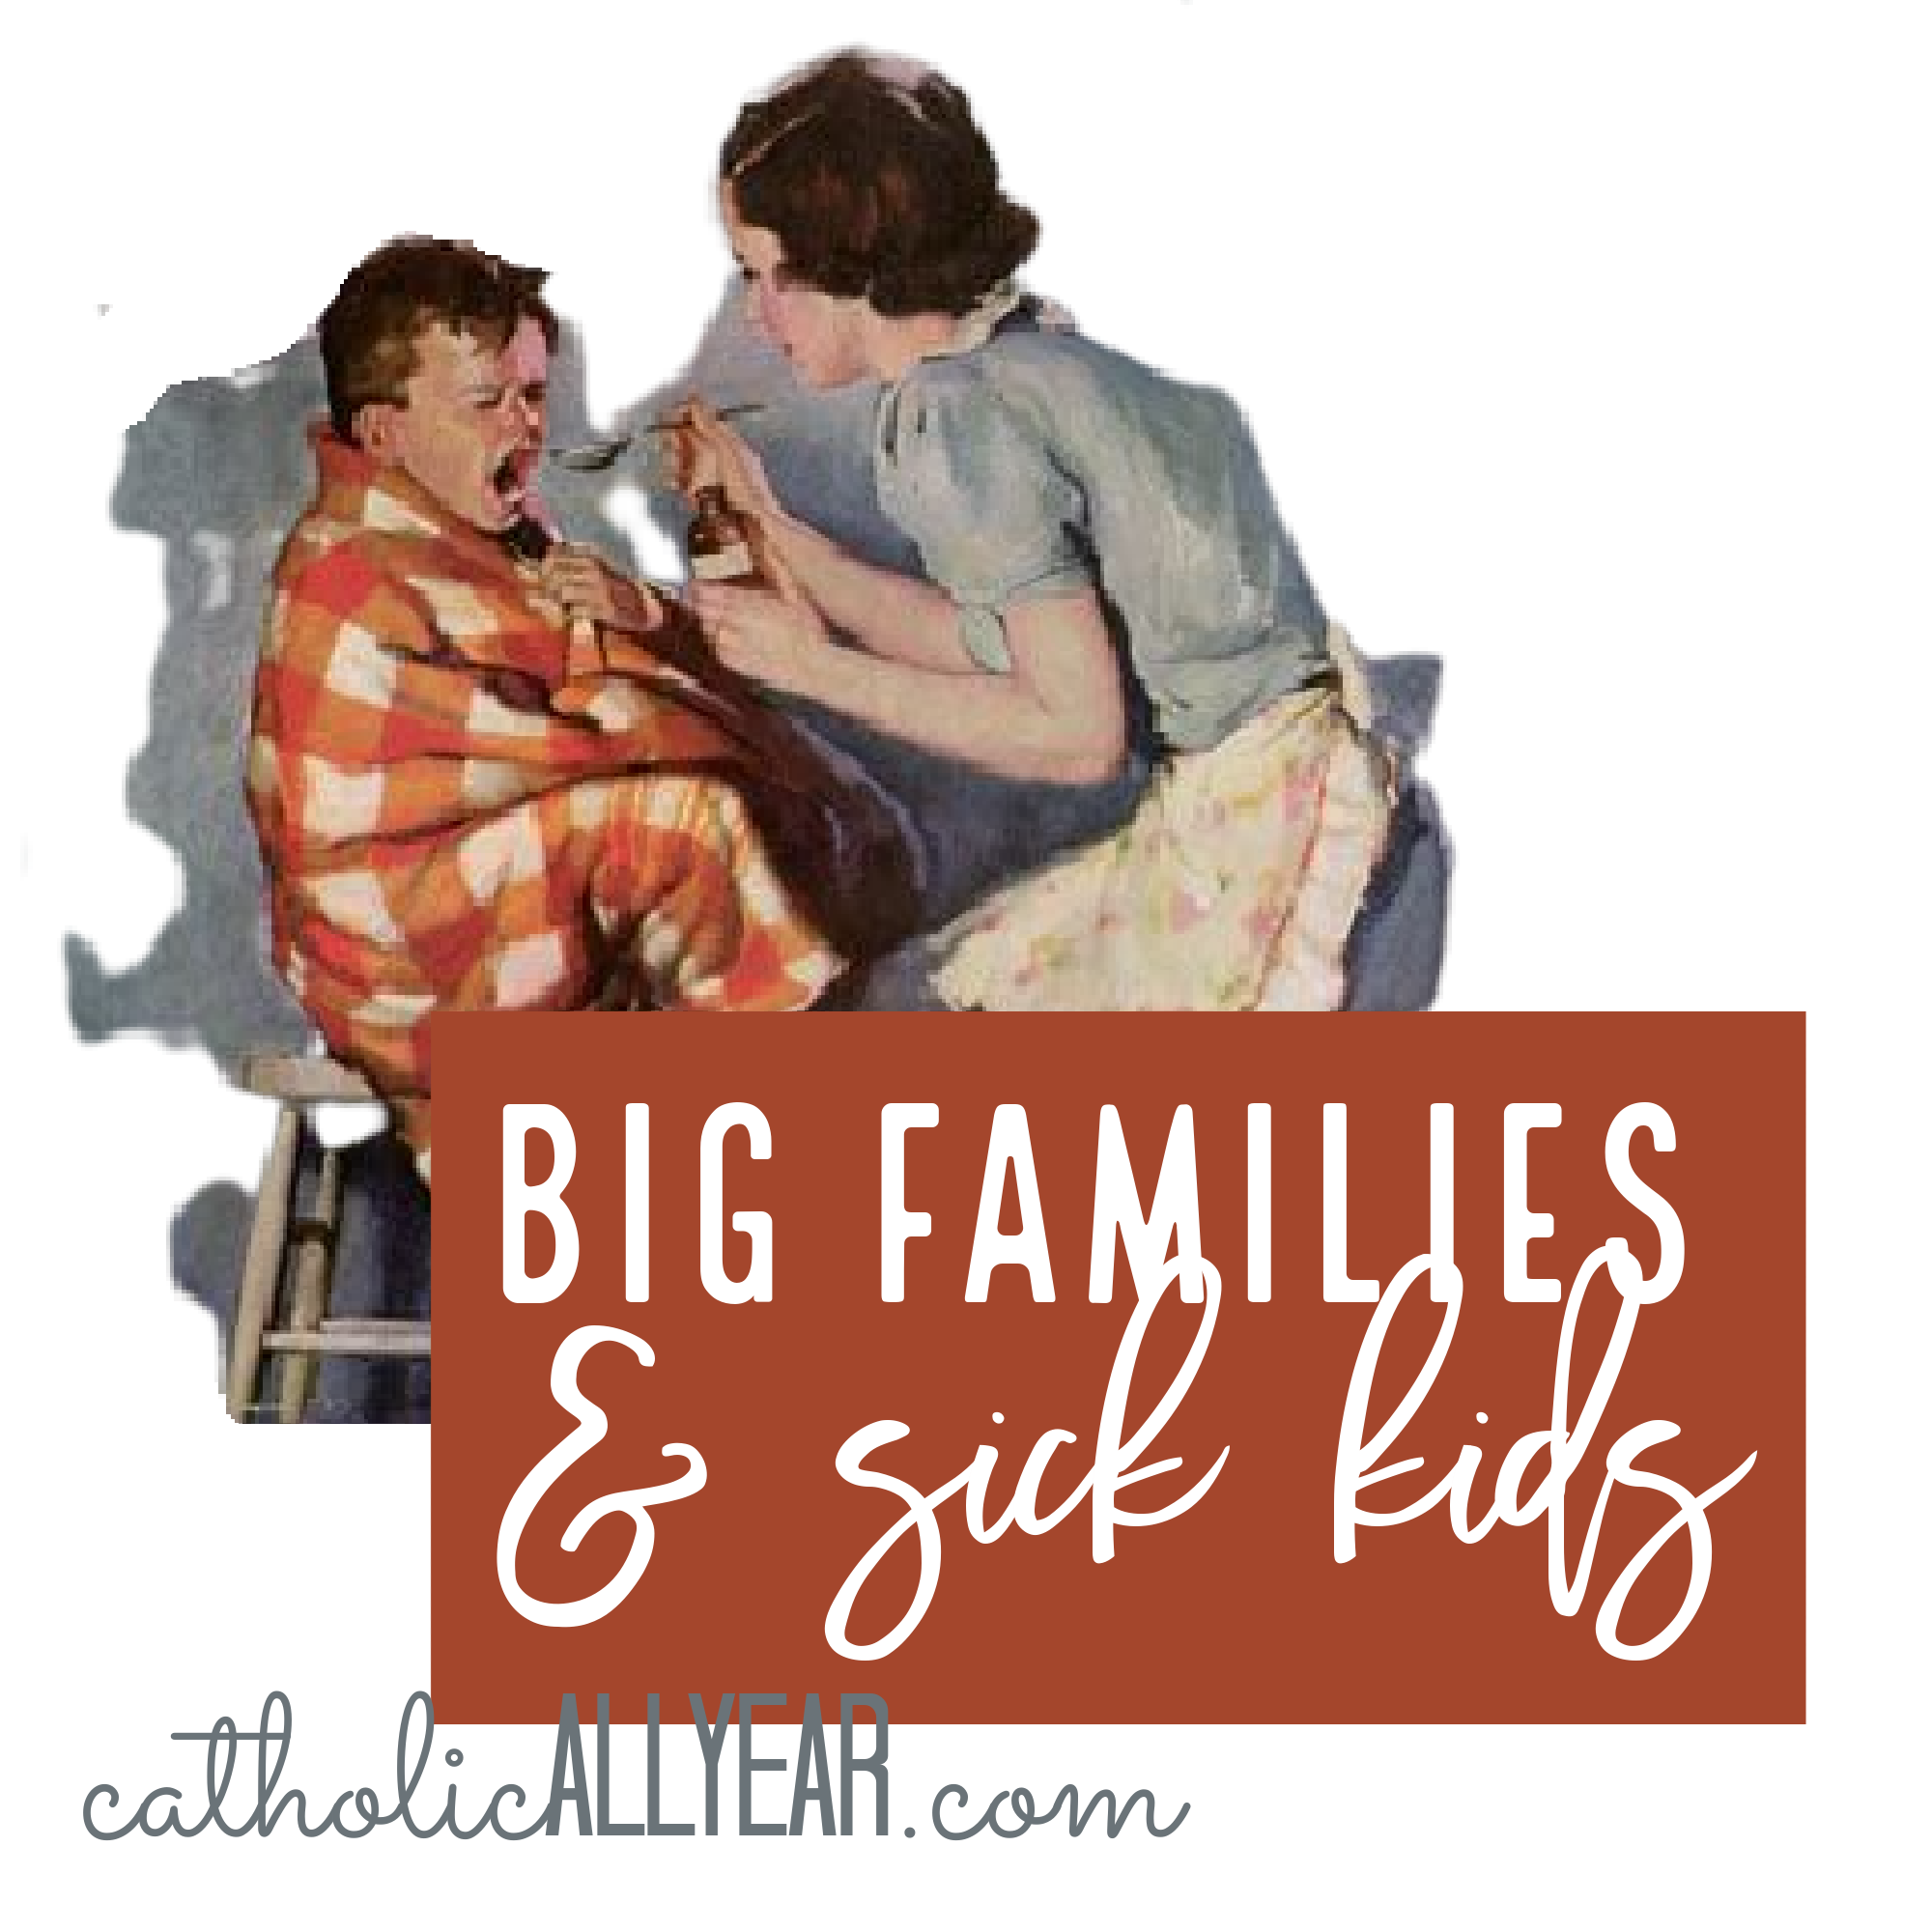 Big Families and Sick Kids: Catholic All Year Mailbag Is Back!